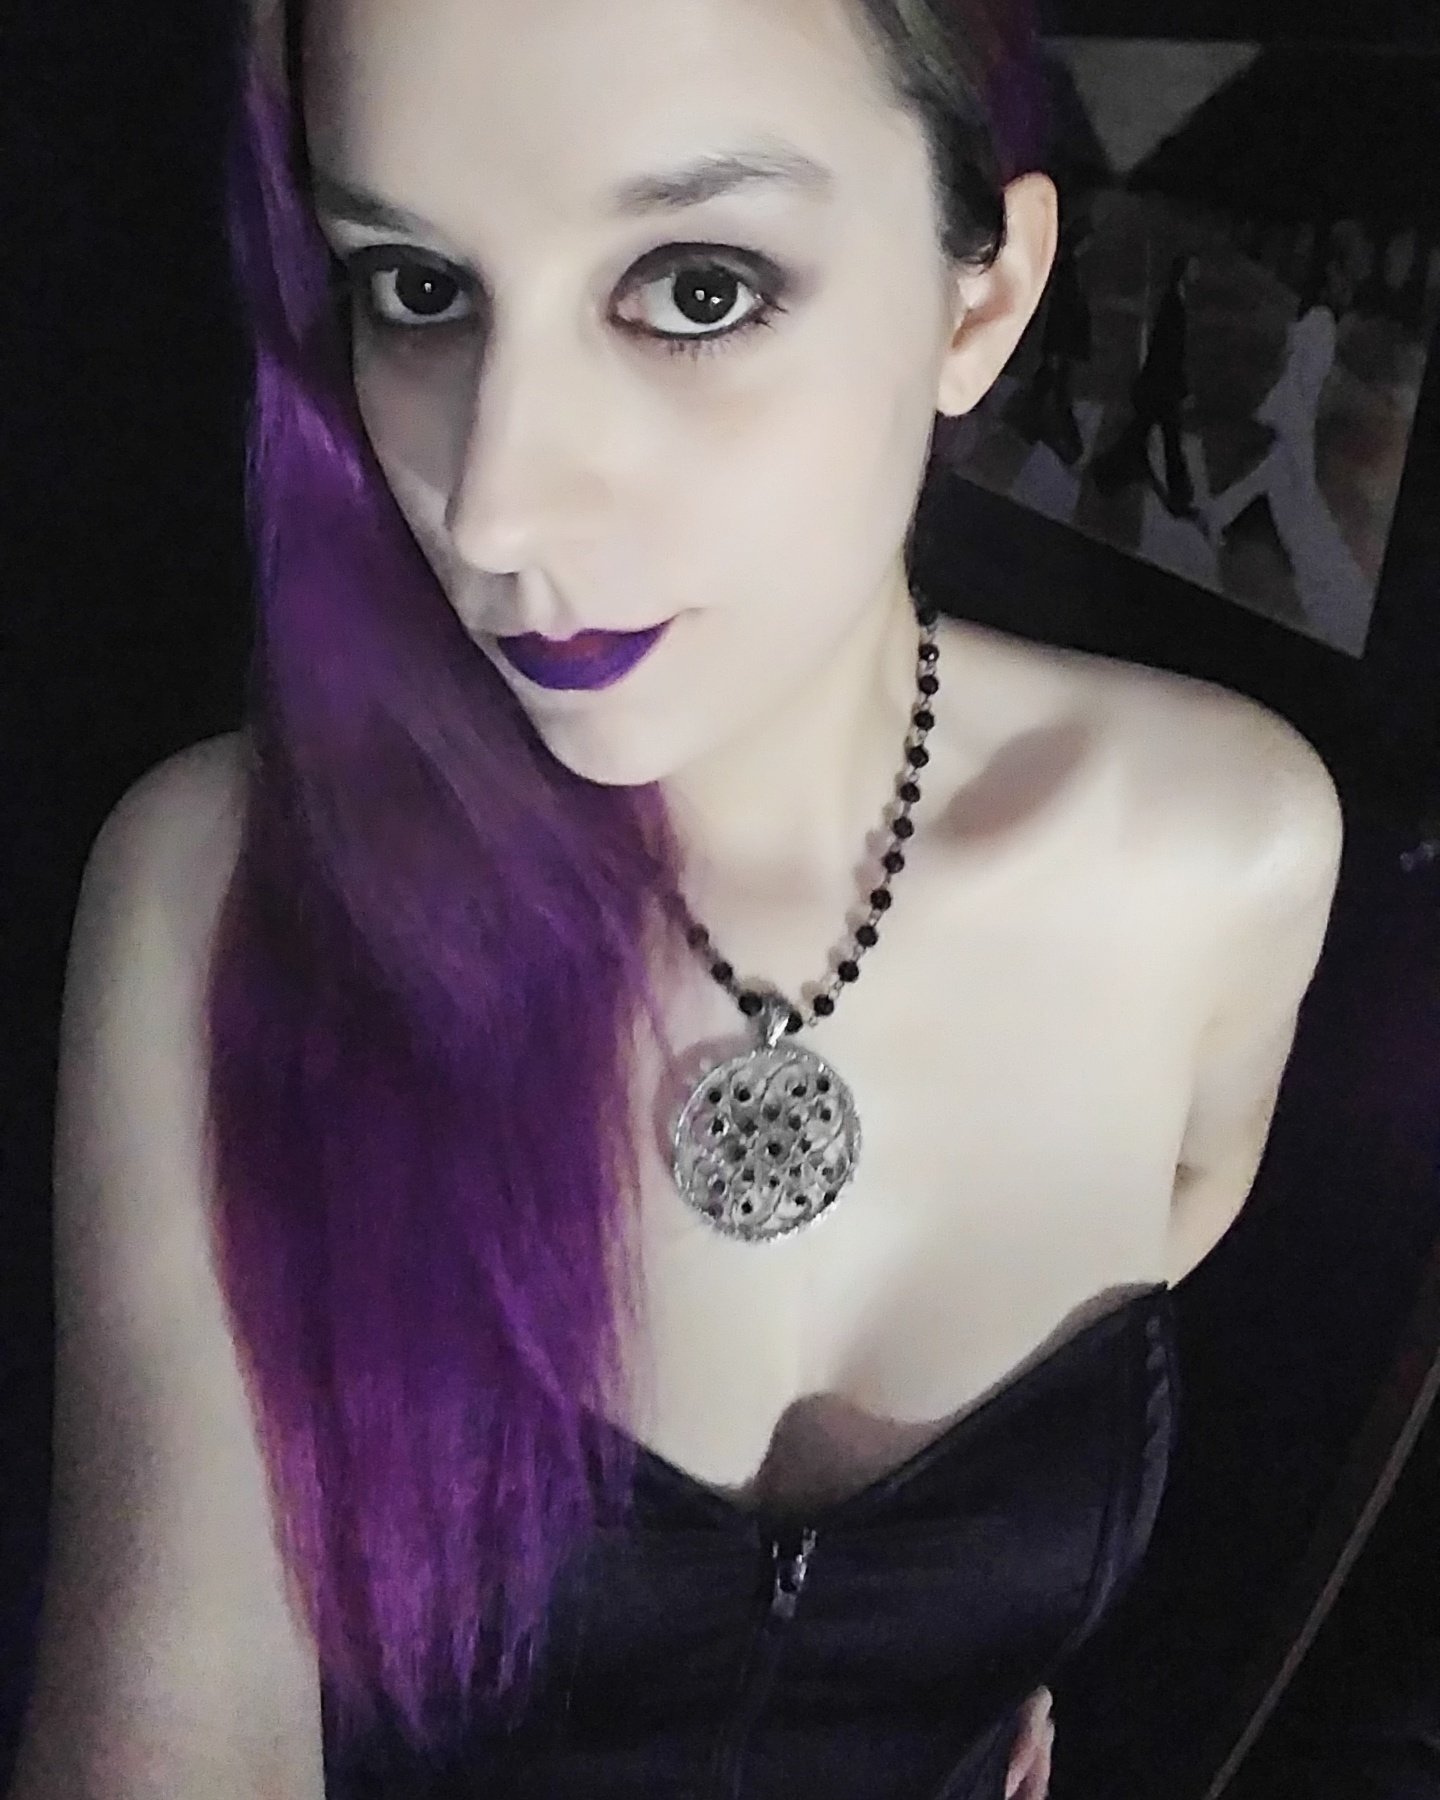 Bow down to perfection
#domme #goth #goddess #femdom #findom #purplehair #goth #sexy https://t.co/aw